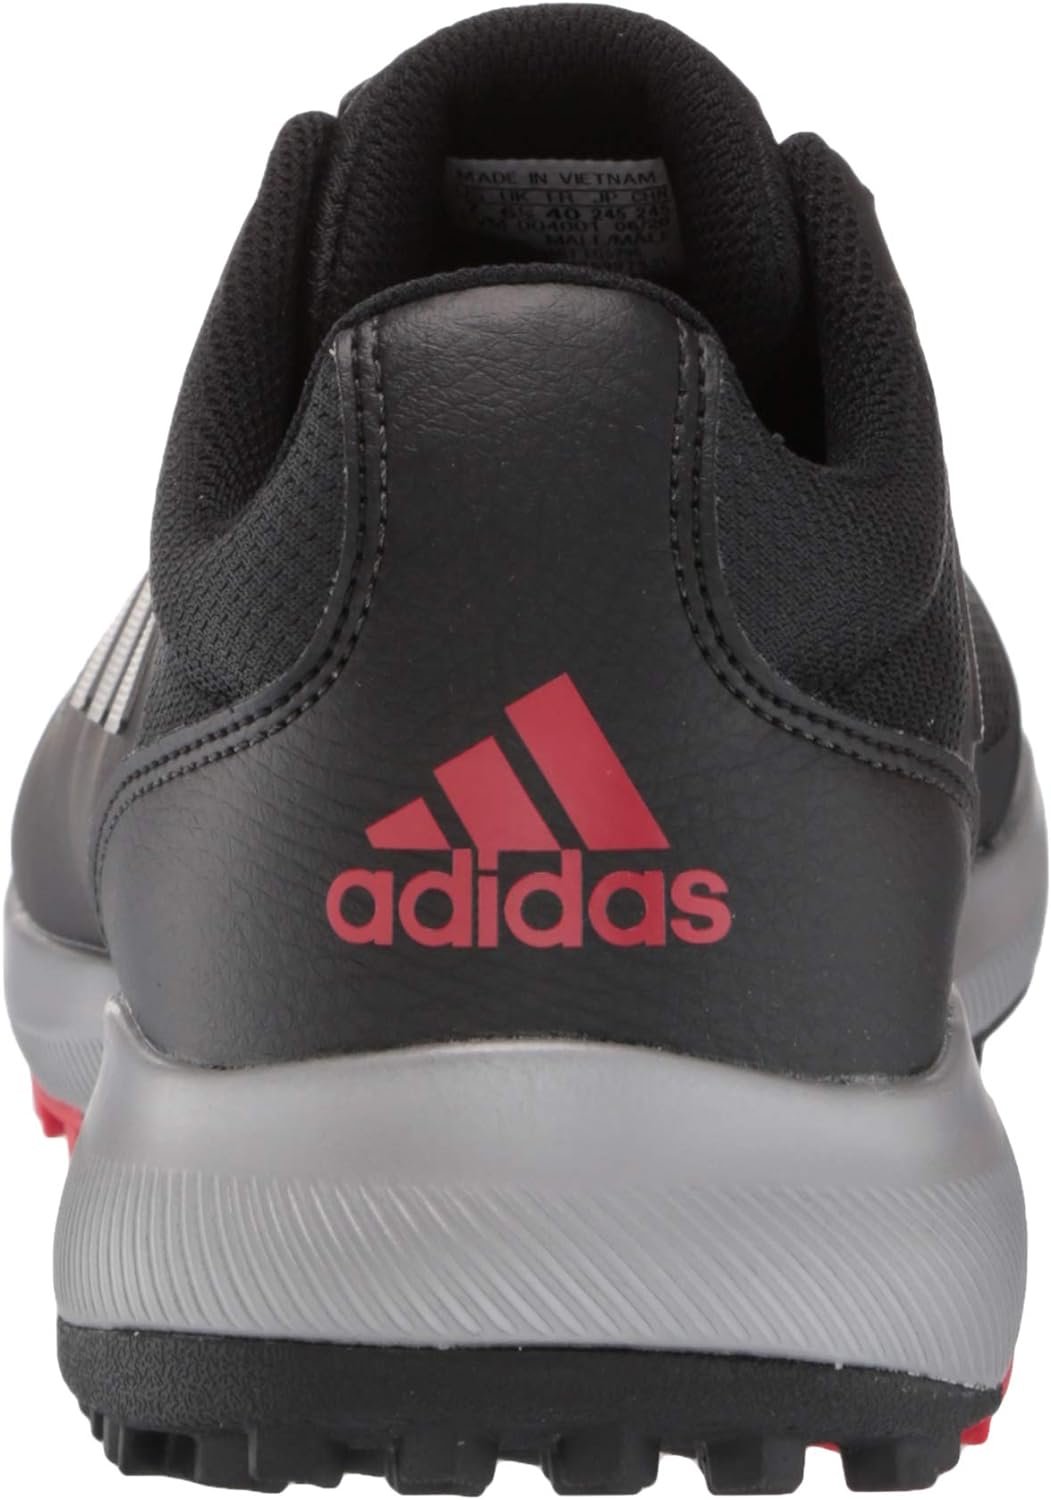 Comparing and Reviewing adidas Golf Gear: Shoes, Shorts, and Cleats